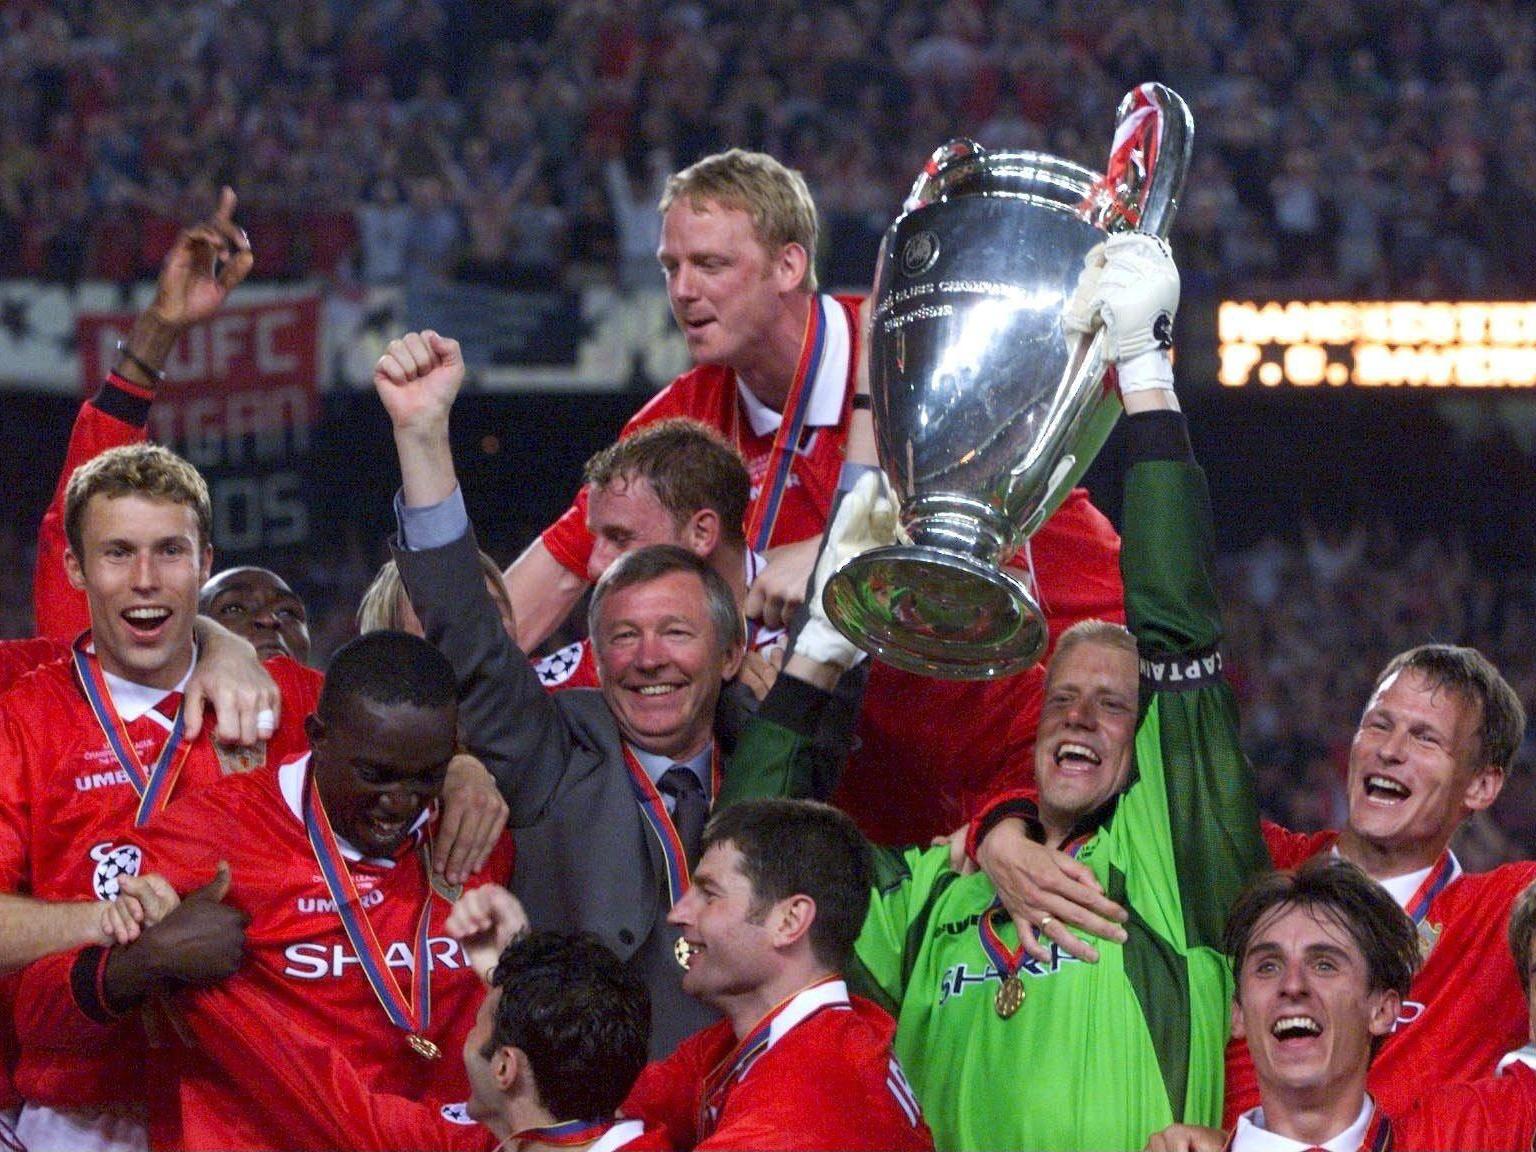 Manchester United won the Champions League in dramatic fashion in 1999